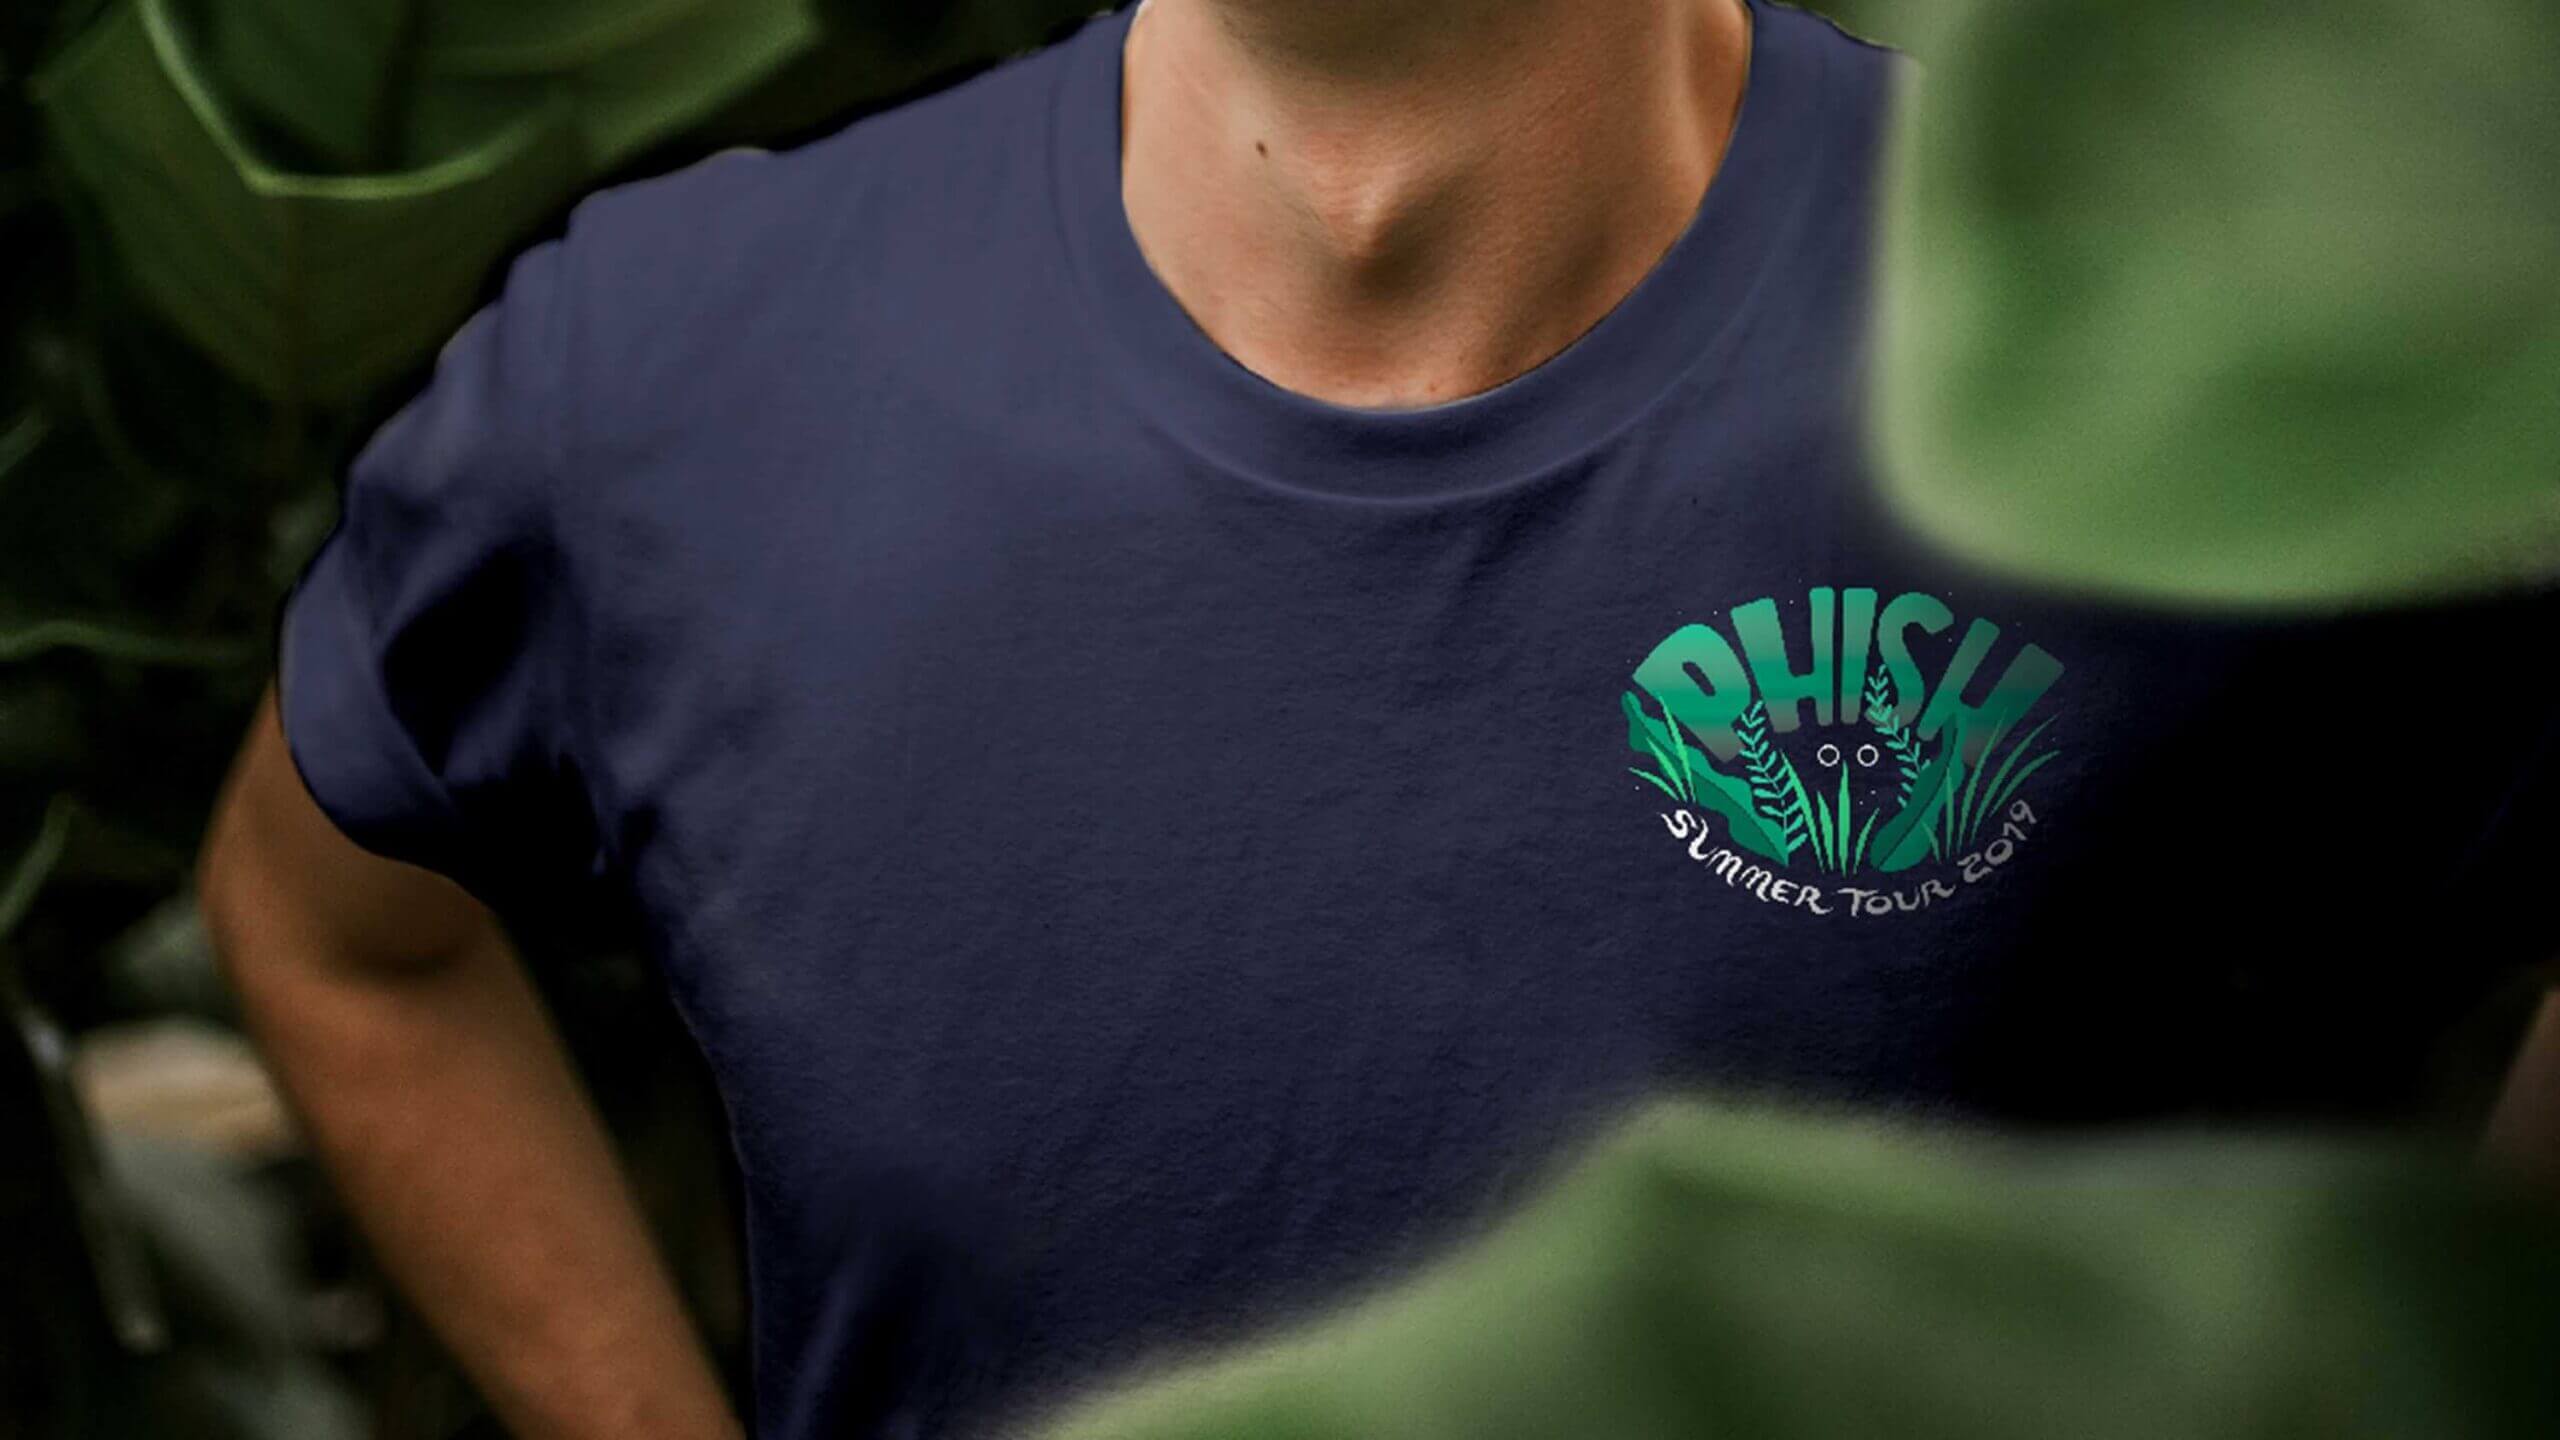 A person wearing a blue Phish tshirt which reads "Summer Tour 2019"